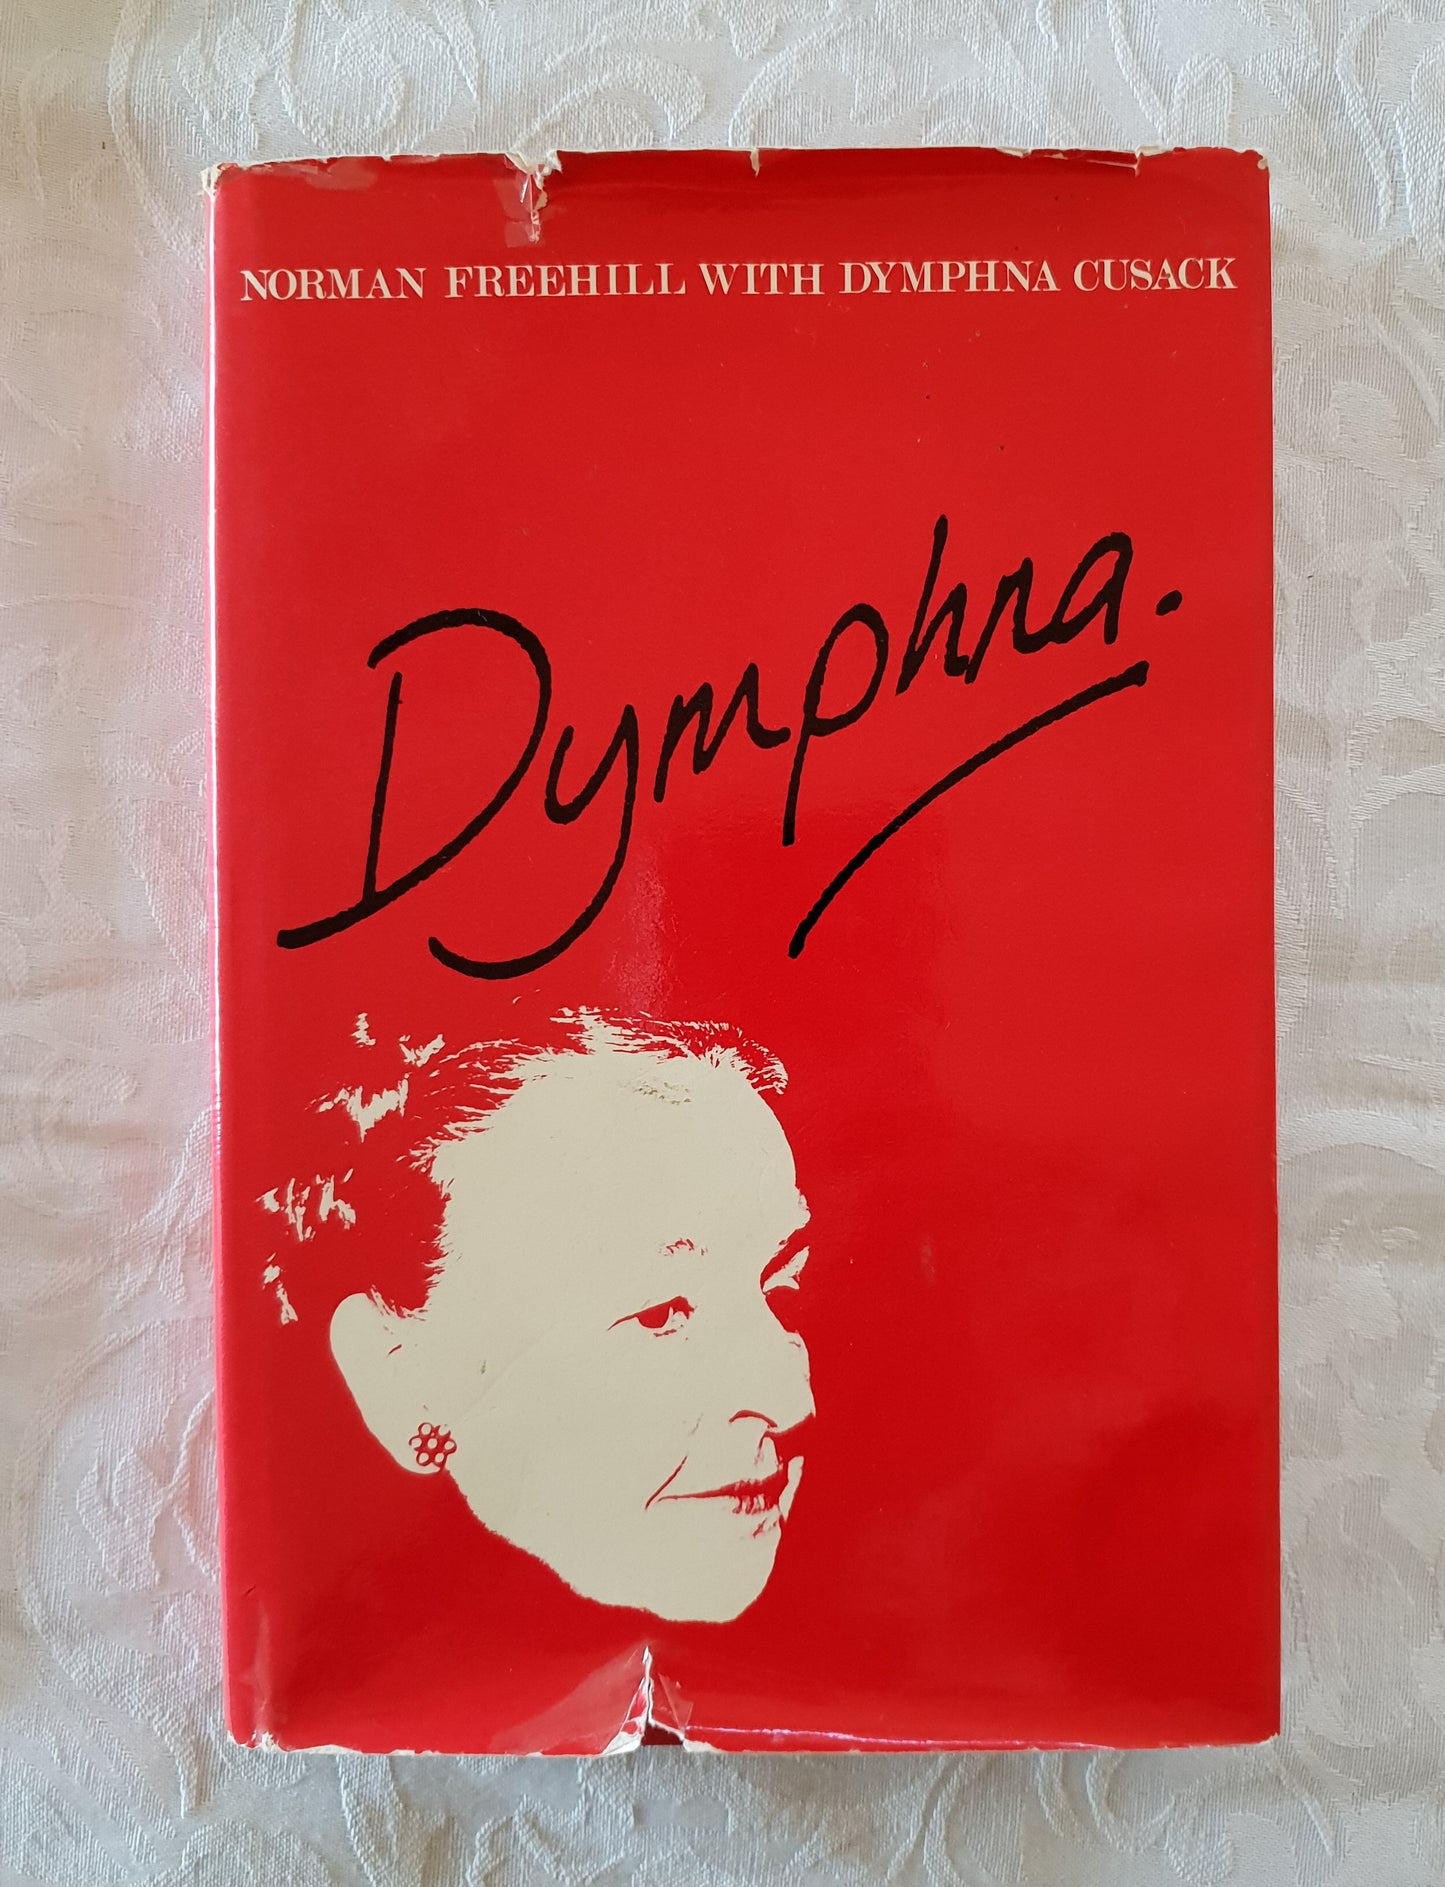 Dymphna Cusack by Norman Freehill with Dymphna Cusack